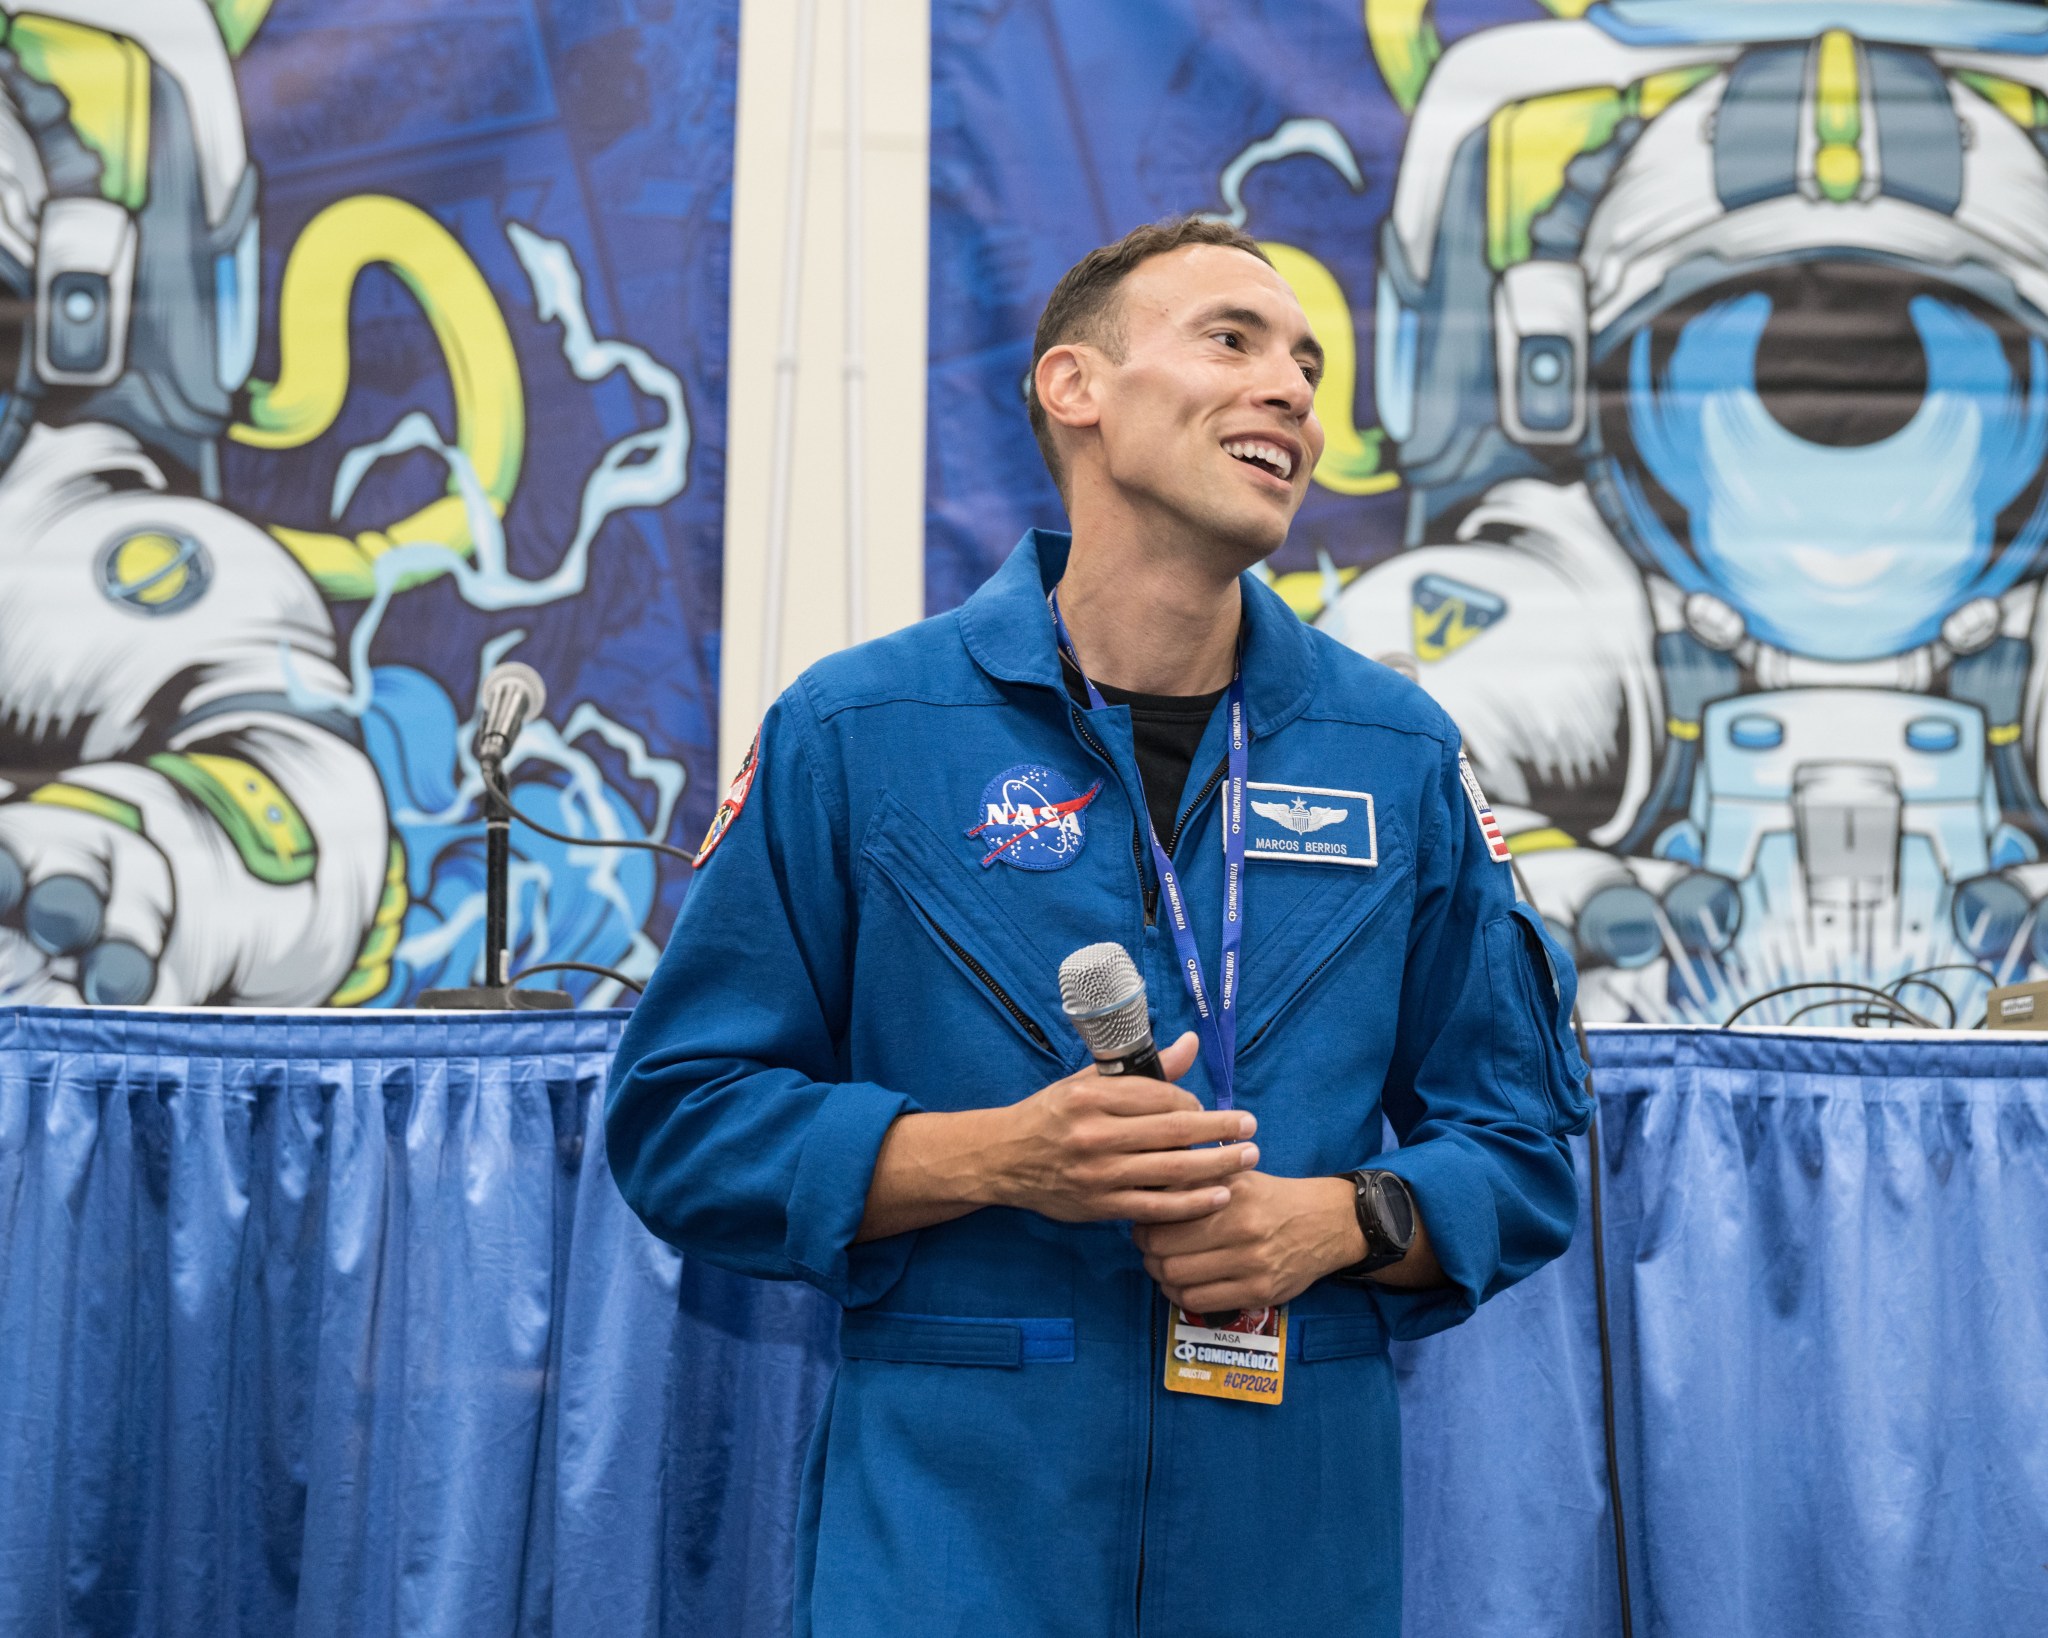 NASA astronaut Marcos Berrios holds a microphone while giving a presentation at Comicpalooza.